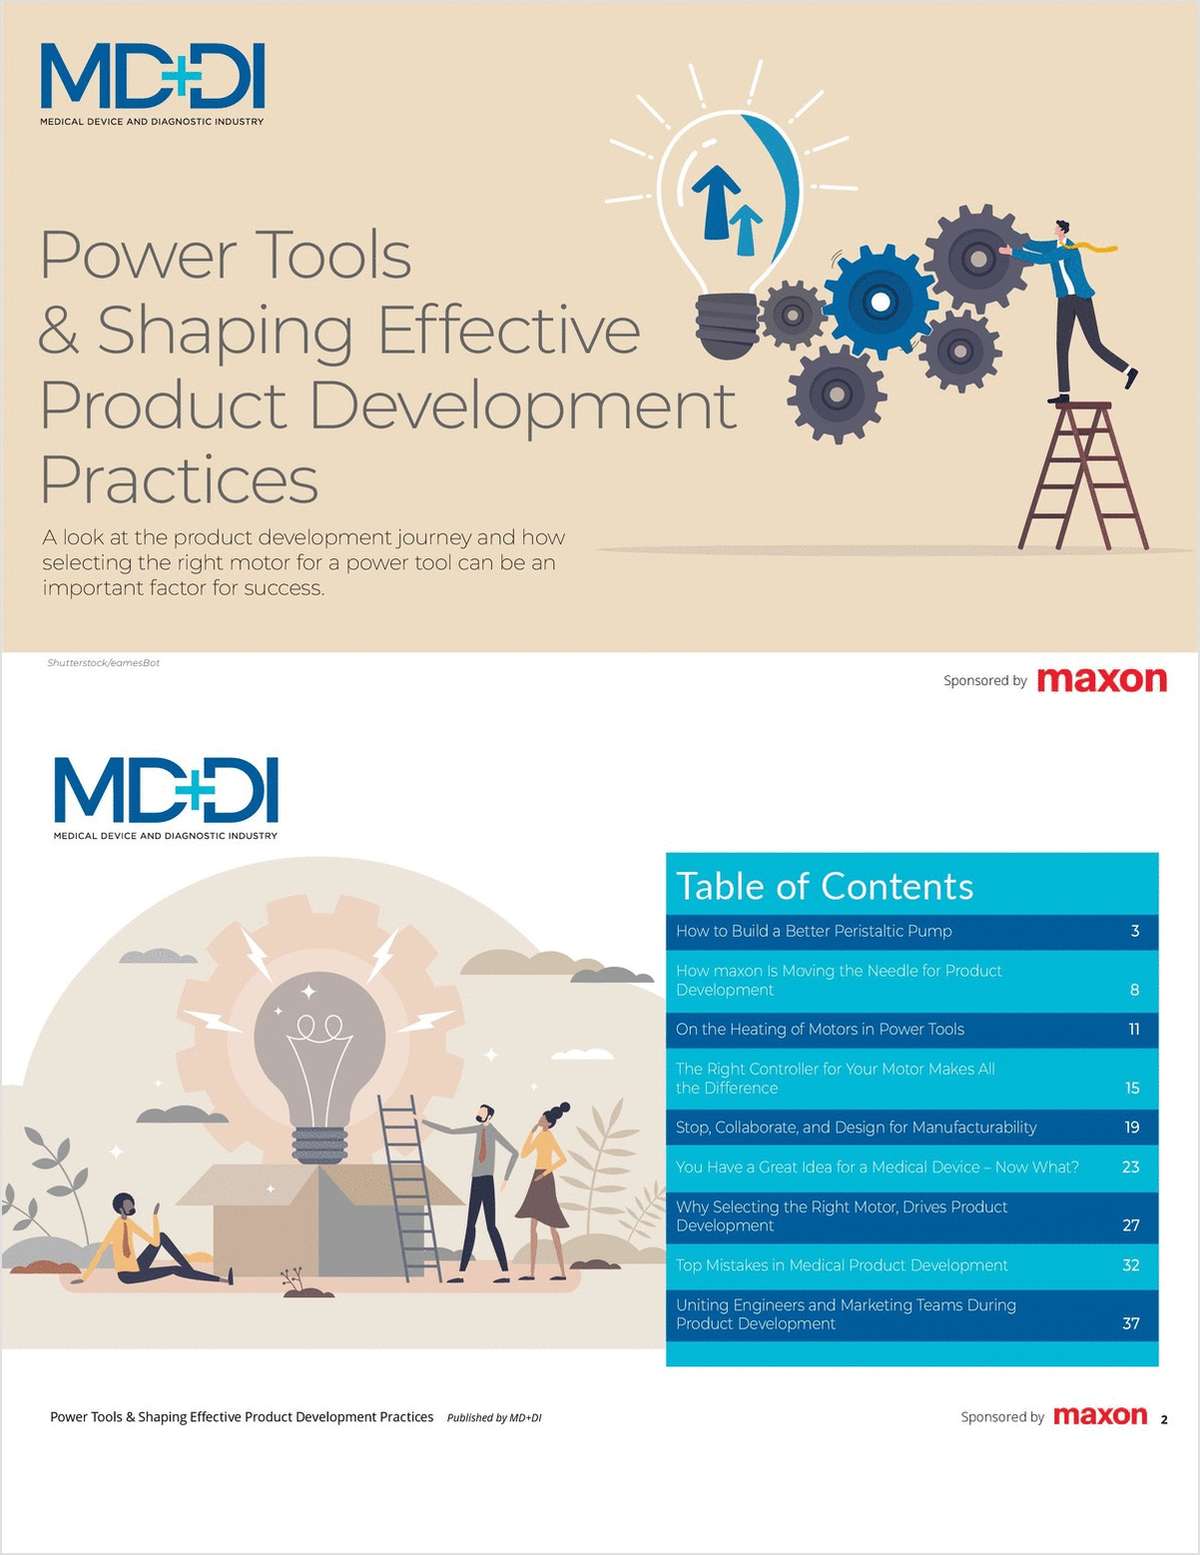 Power Tools & Shaping Effective Product Development Practices